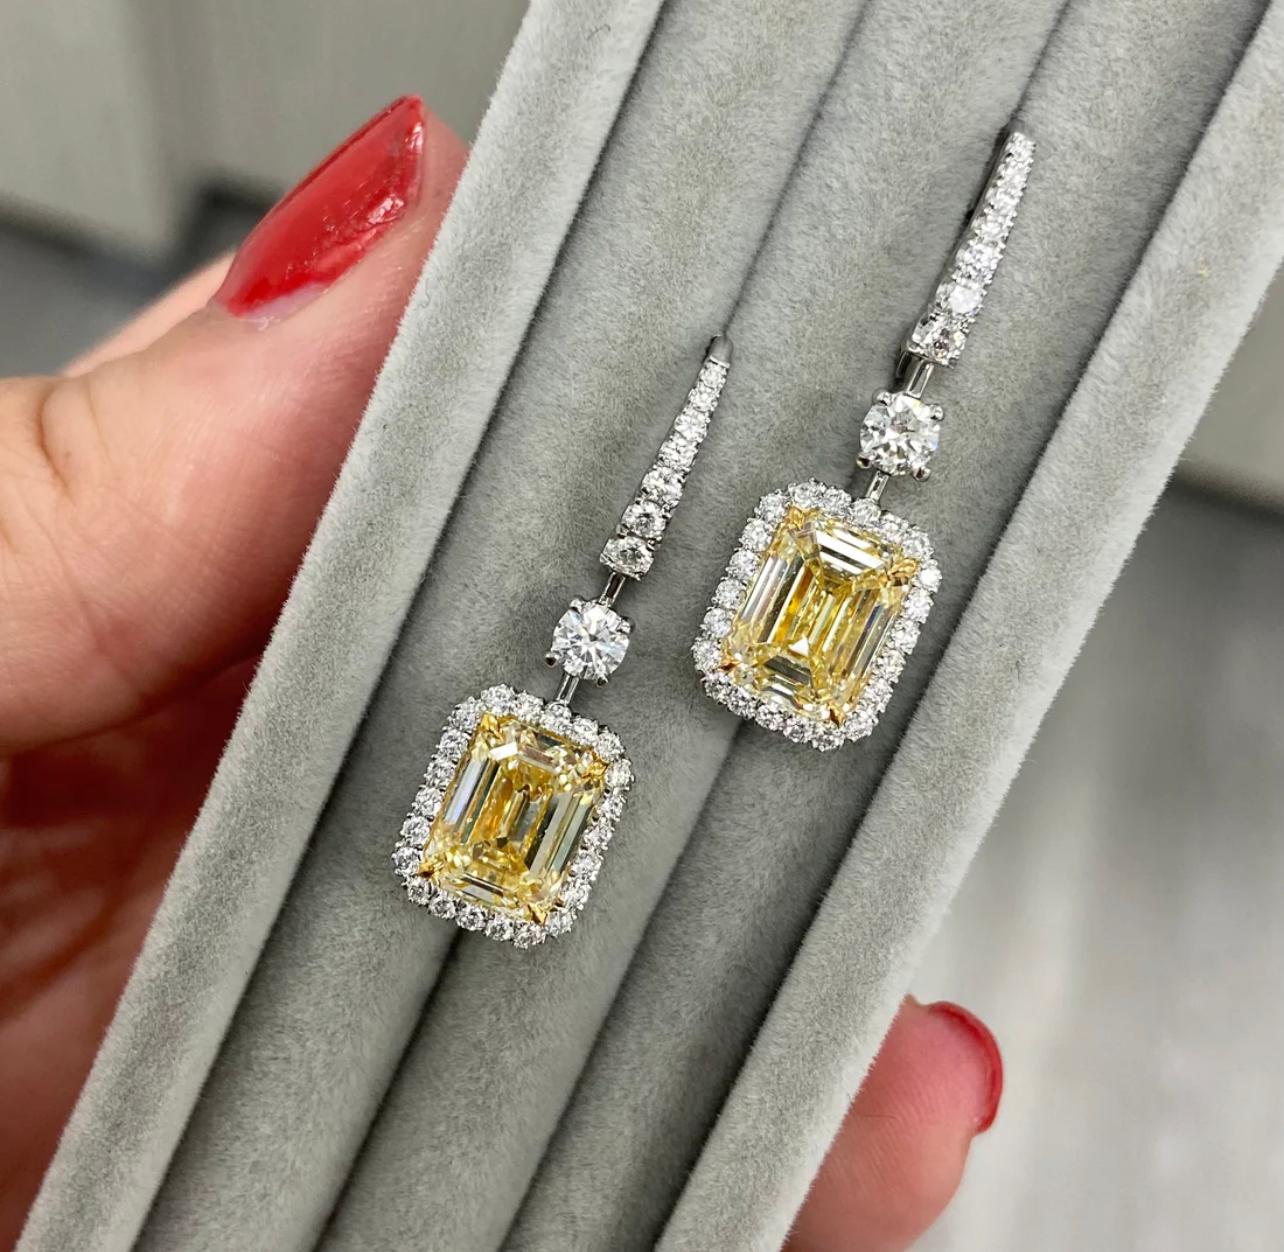 2.76 and 2.50 carat  Light Yellow (U-V Range) Center Emerald Cut Diamonds 
VS1+VS2 Clarity
Handmade earrings in platinum and 18 karat gold with fine natural white diamonds
This piece can be viewed before purchase in our showroom in NYC or at one of